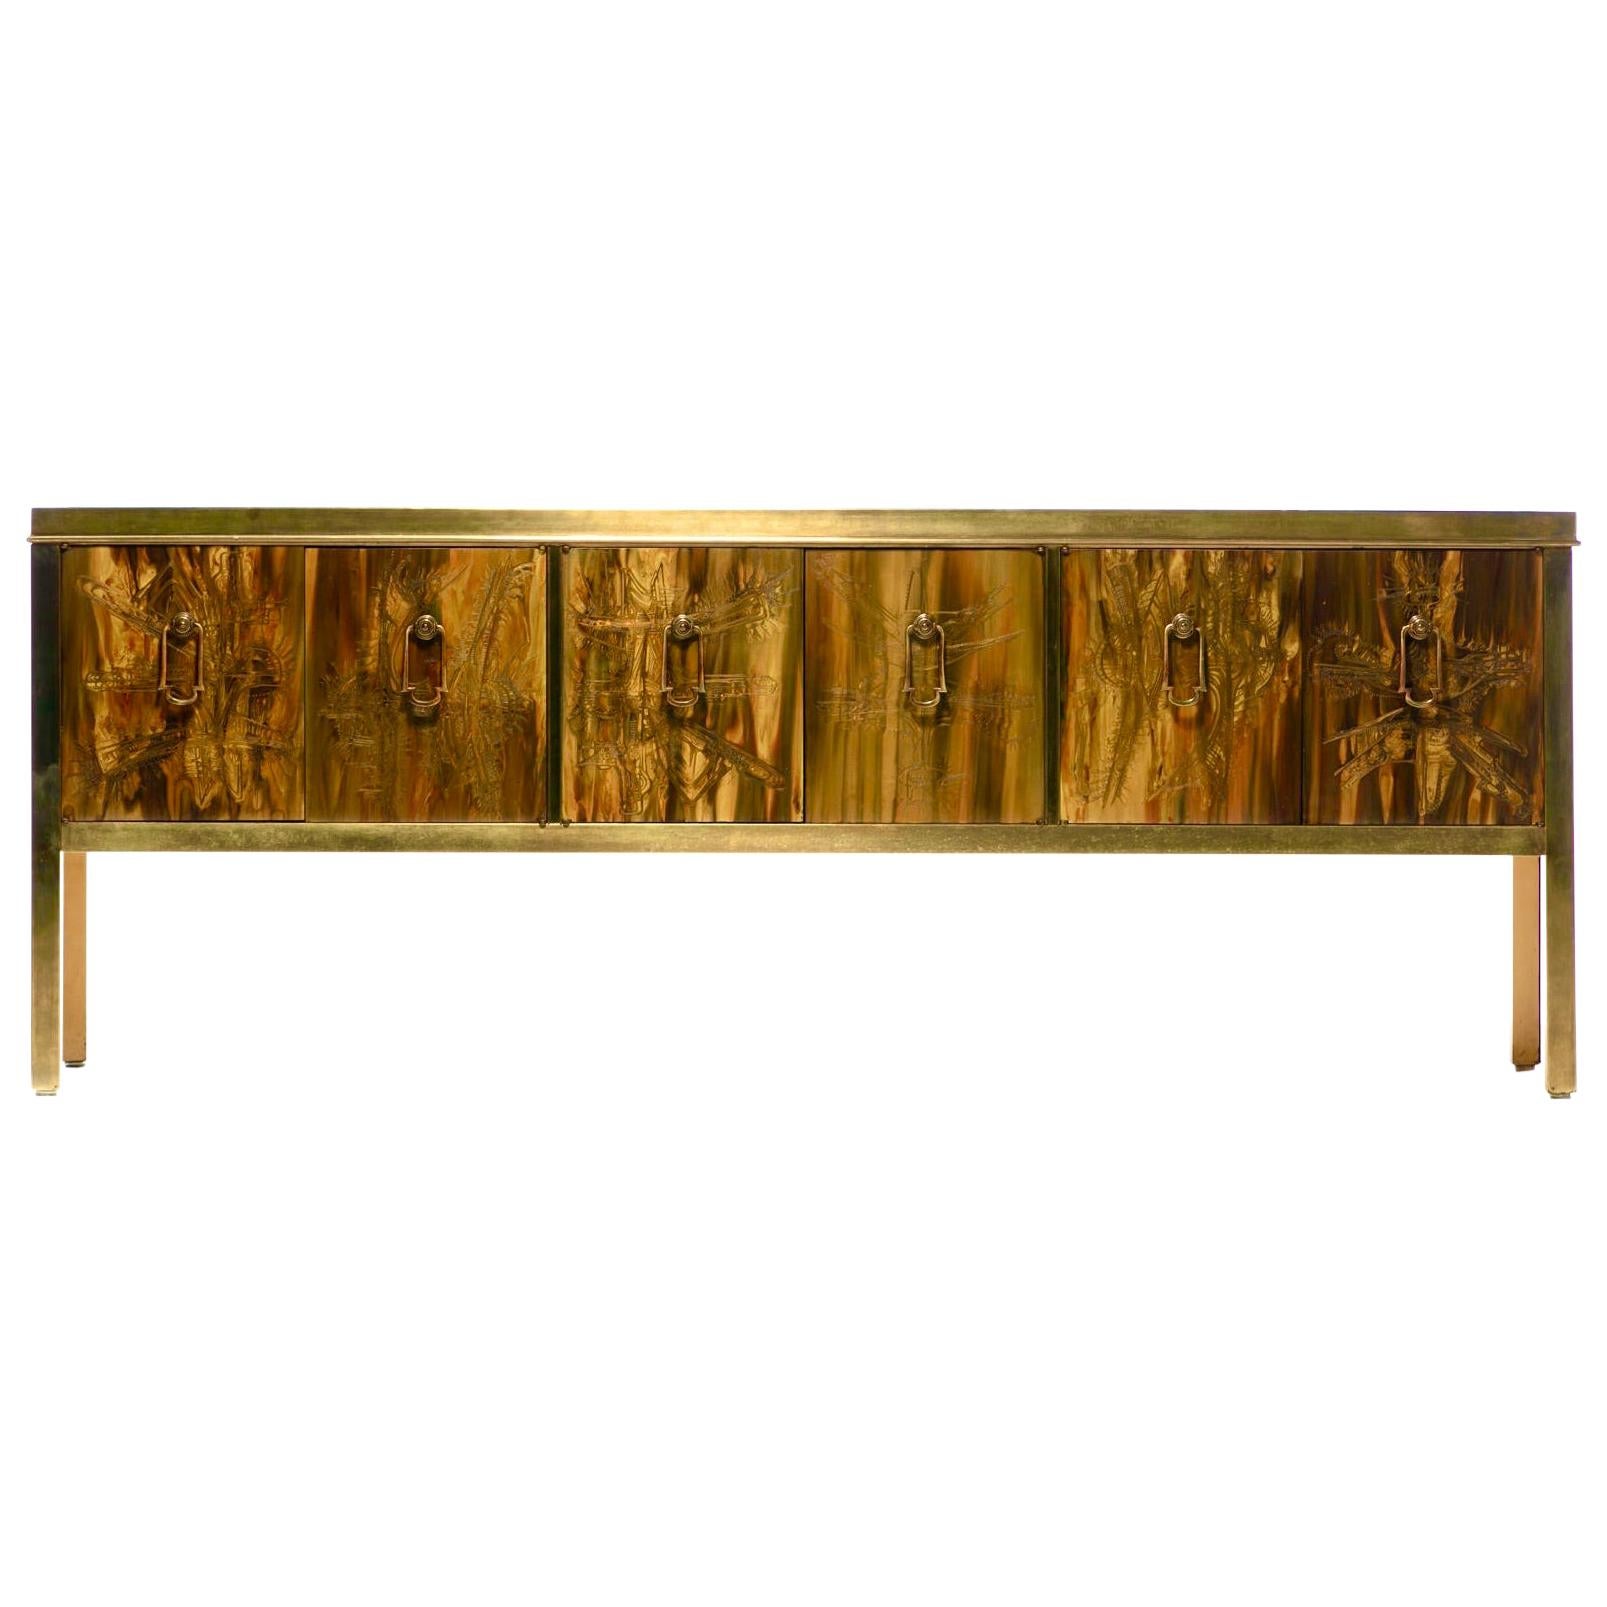 Bernhard Rohne Acid Etched Brass Credenza or Console for Mastercraft, c. 1970s